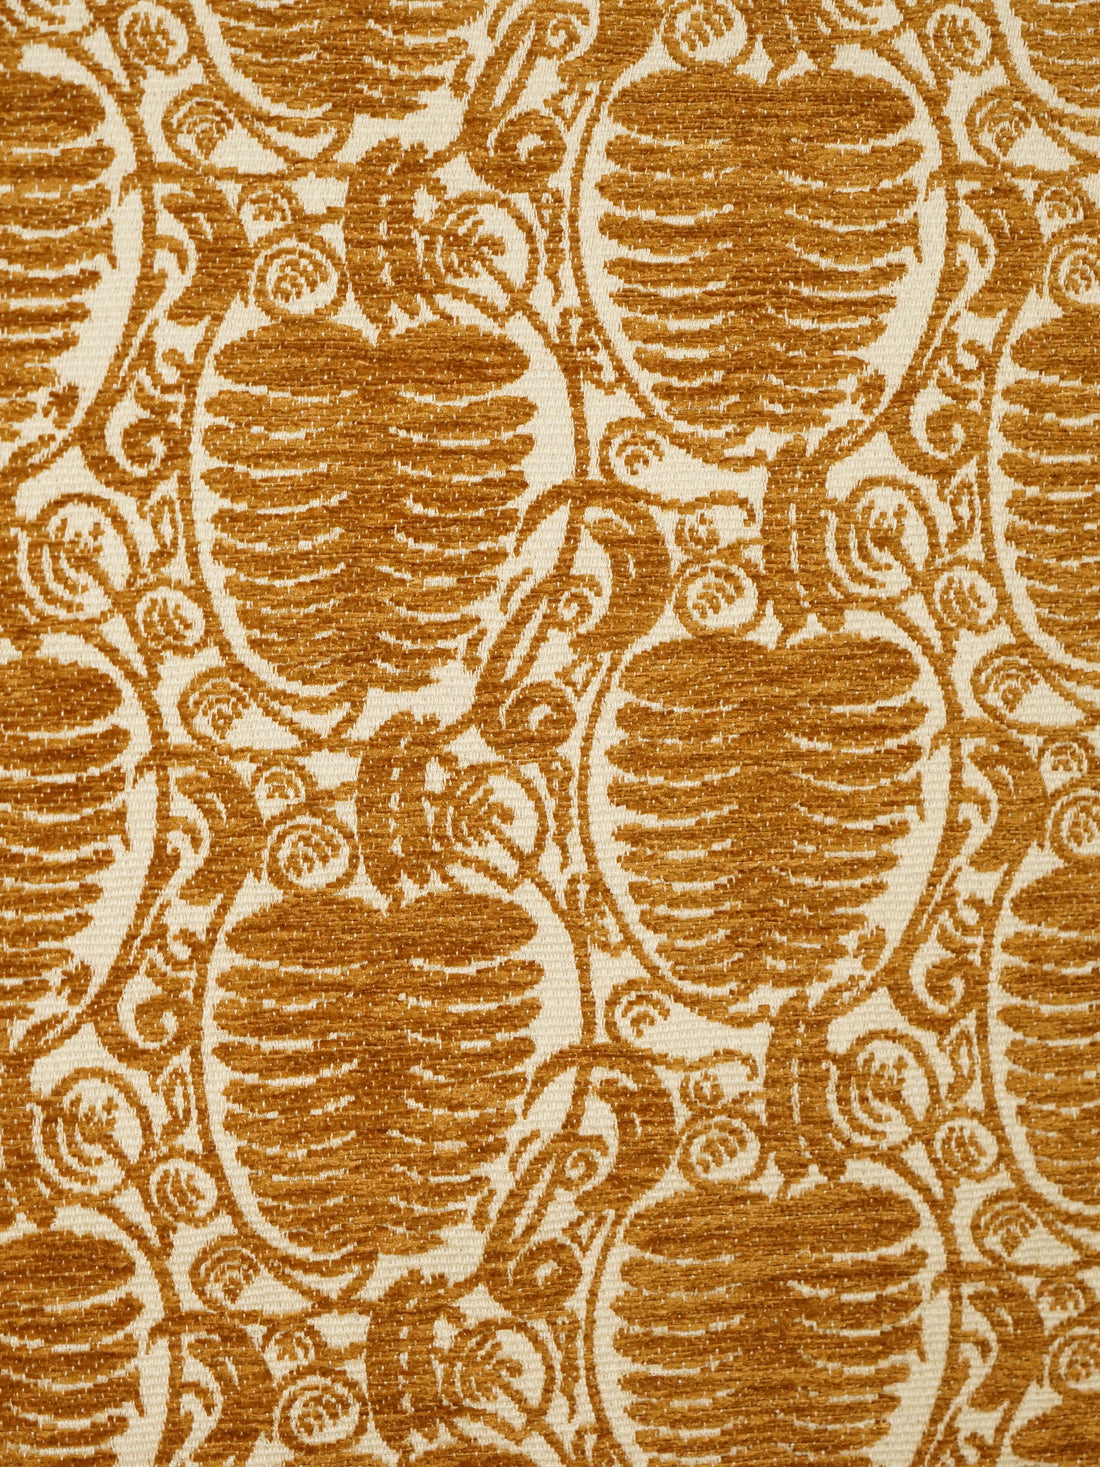 Veneto Pine fabric in gold color - pattern number RL 00029519 - by Scalamandre in the Old World Weavers collection